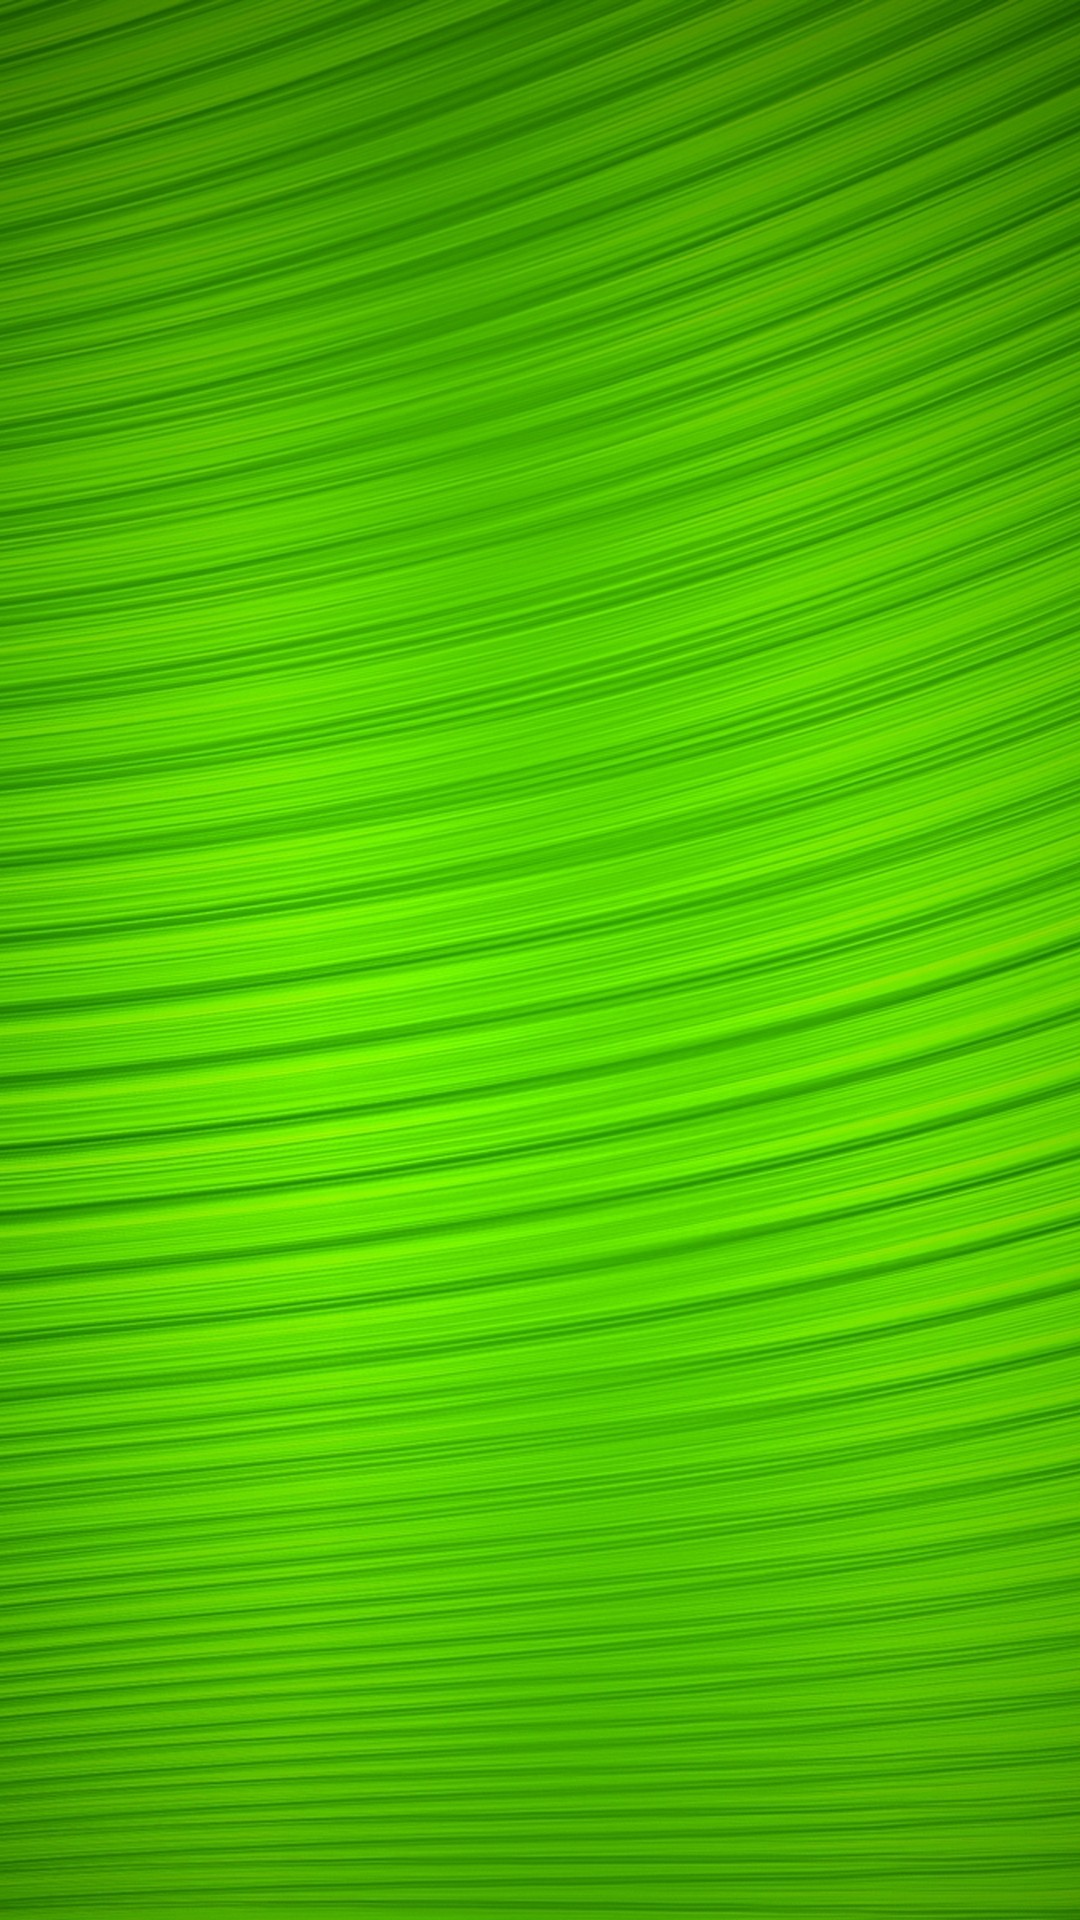 Wallpaper Neon Green iPhone with image resolution 1080x1920 pixel. You can make this wallpaper for your iPhone 5, 6, 7, 8, X backgrounds, Mobile Screensaver, or iPad Lock Screen